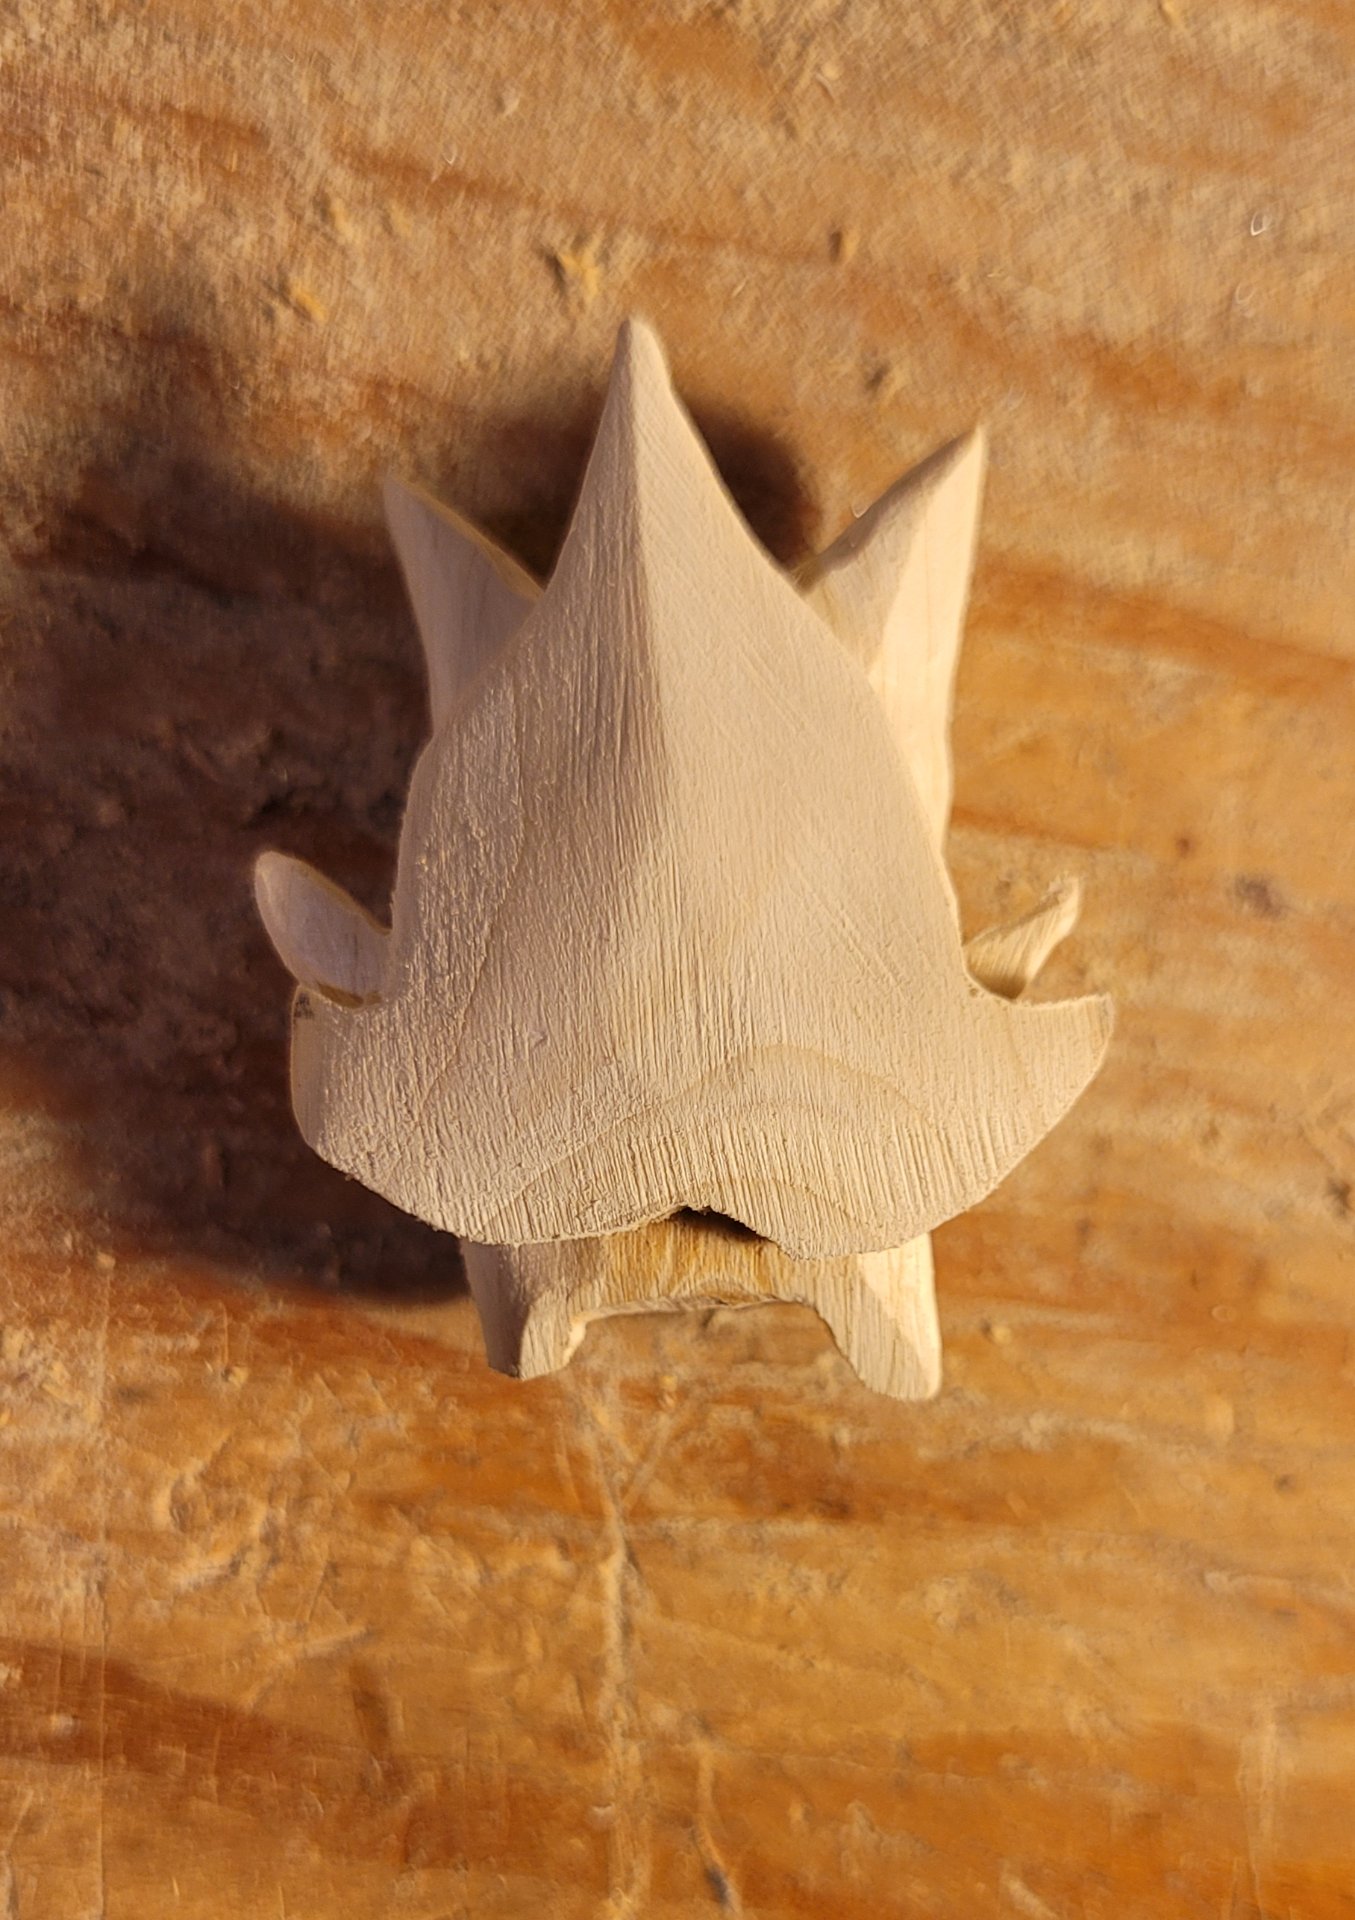 the tiny korok wearing his roughcut mask, which has been shaped down a bit